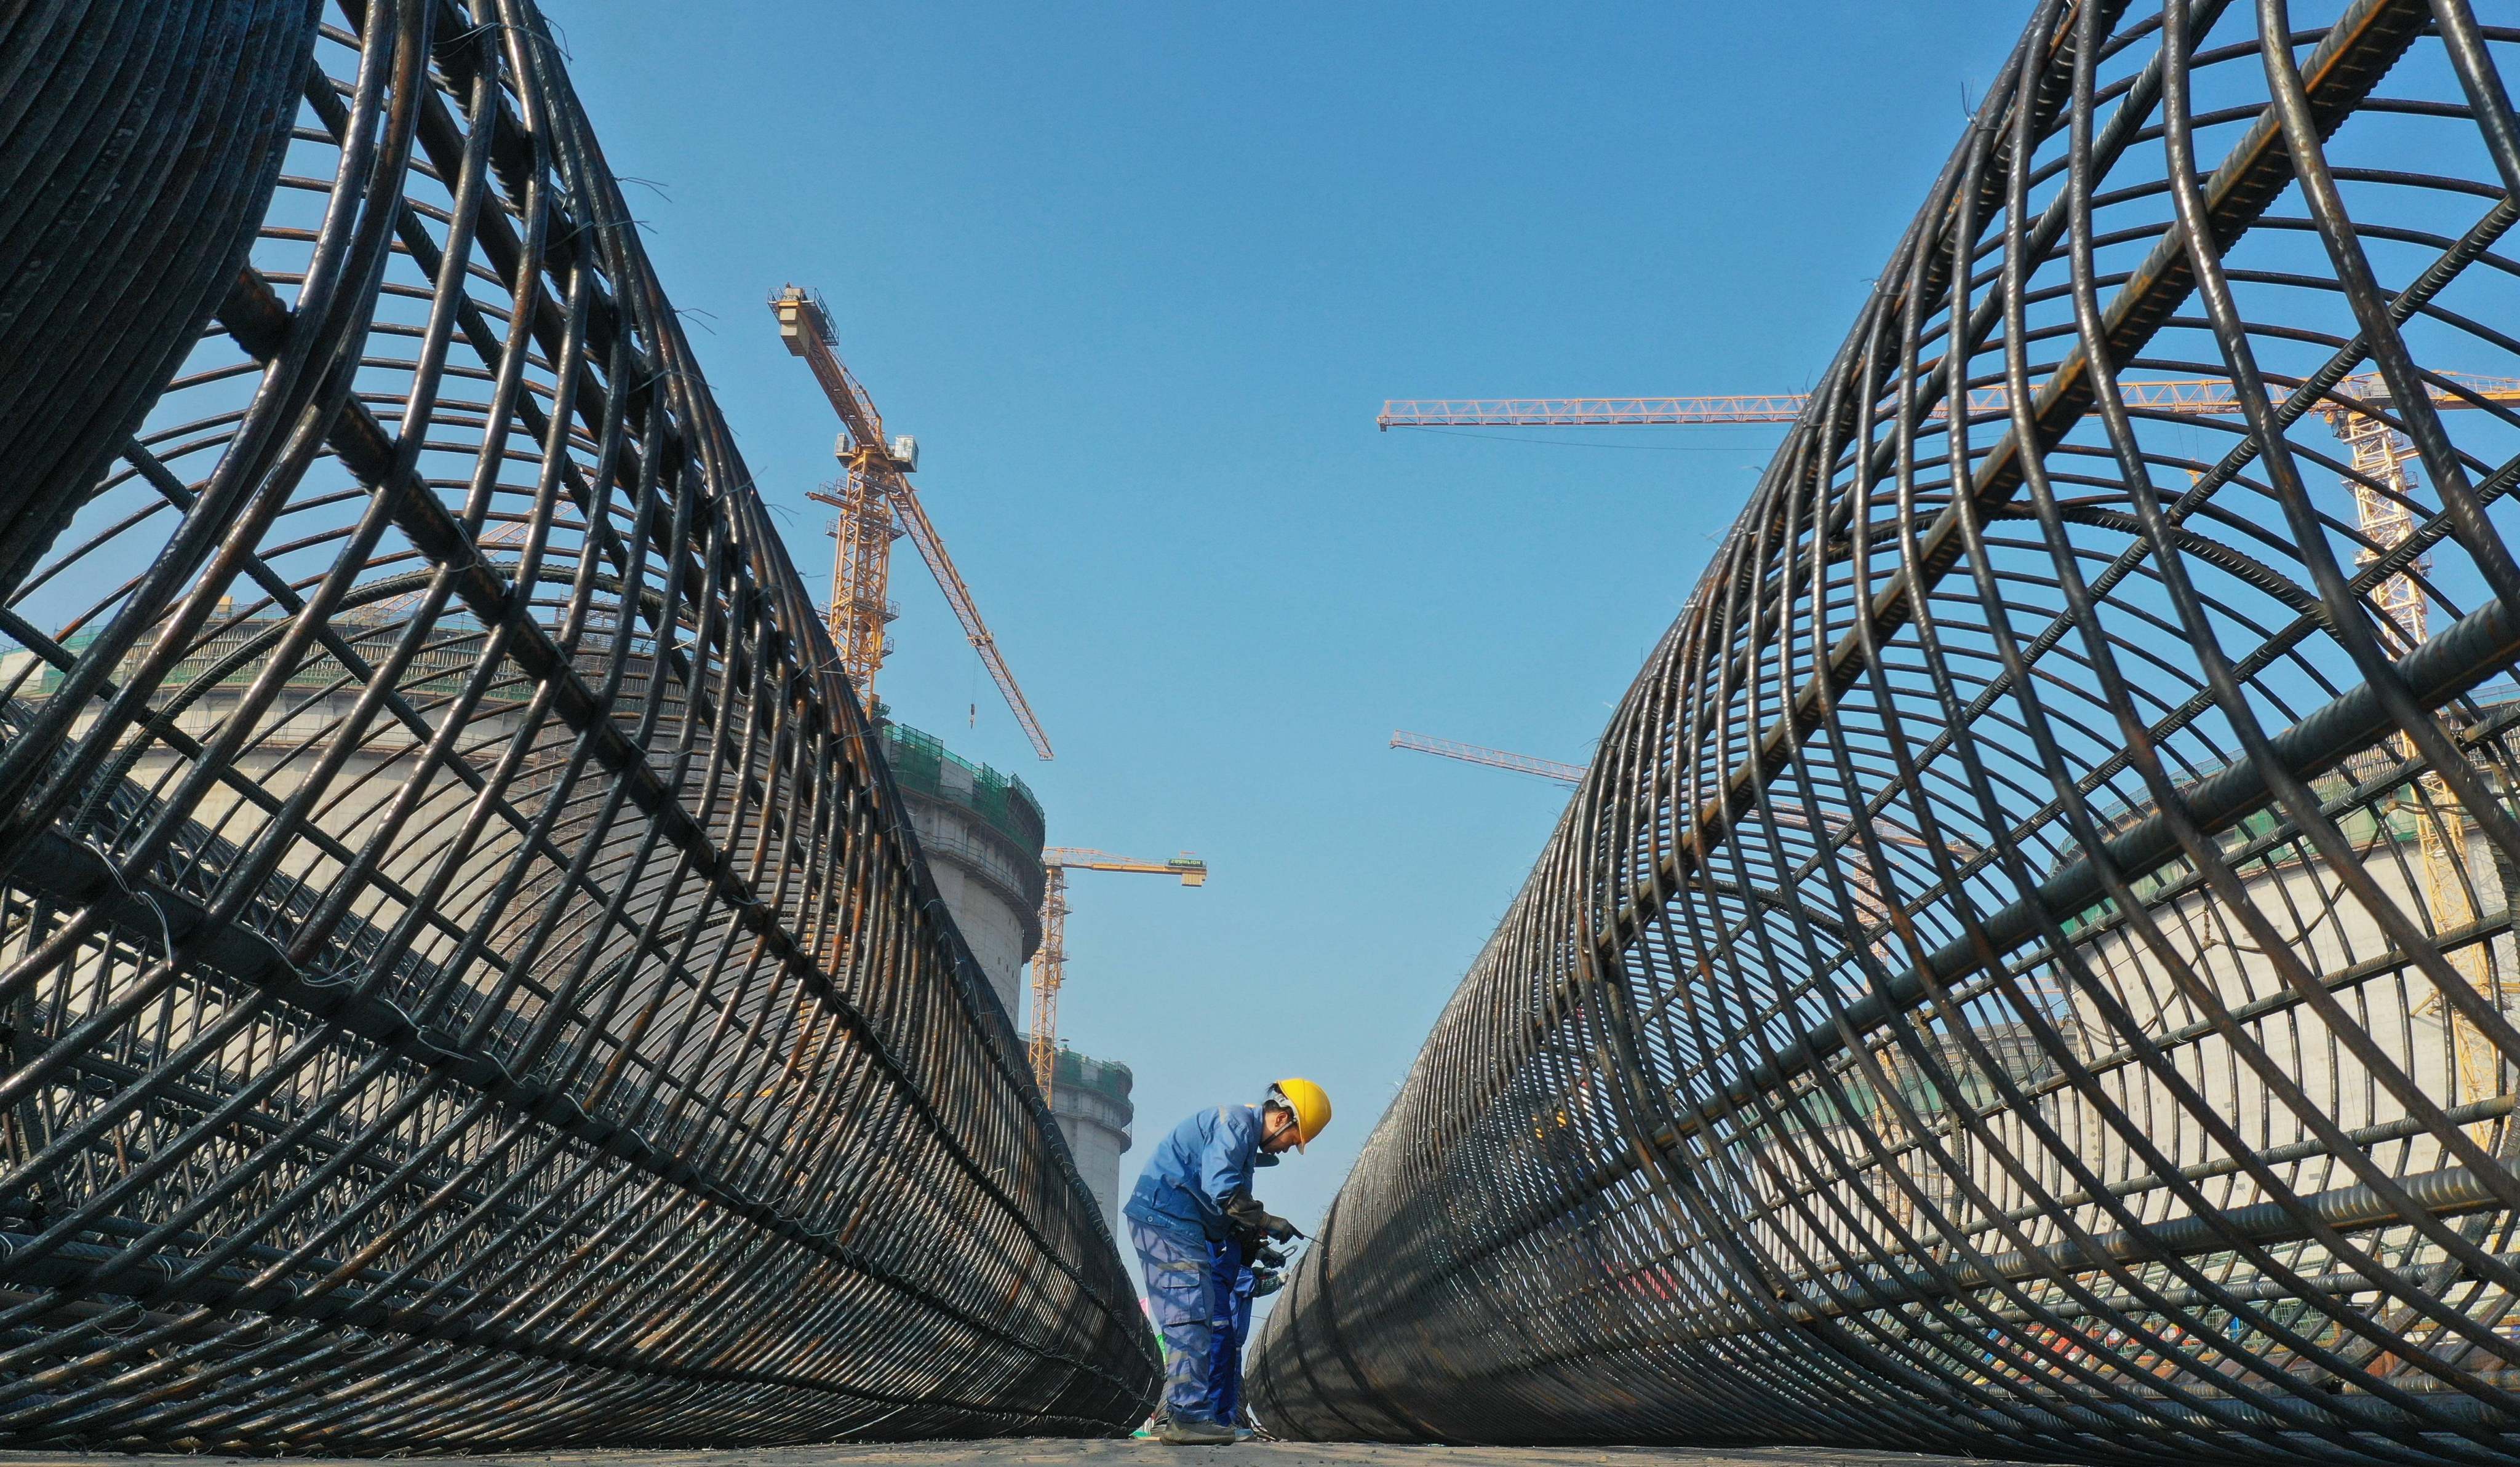 On July 10, 2021, work is under way on the construction of a new  liquefied natural gas (LNG) facility in China’s Hebei province. The Xintian project is expected to be completed by October 2024. Photo: Xinhua